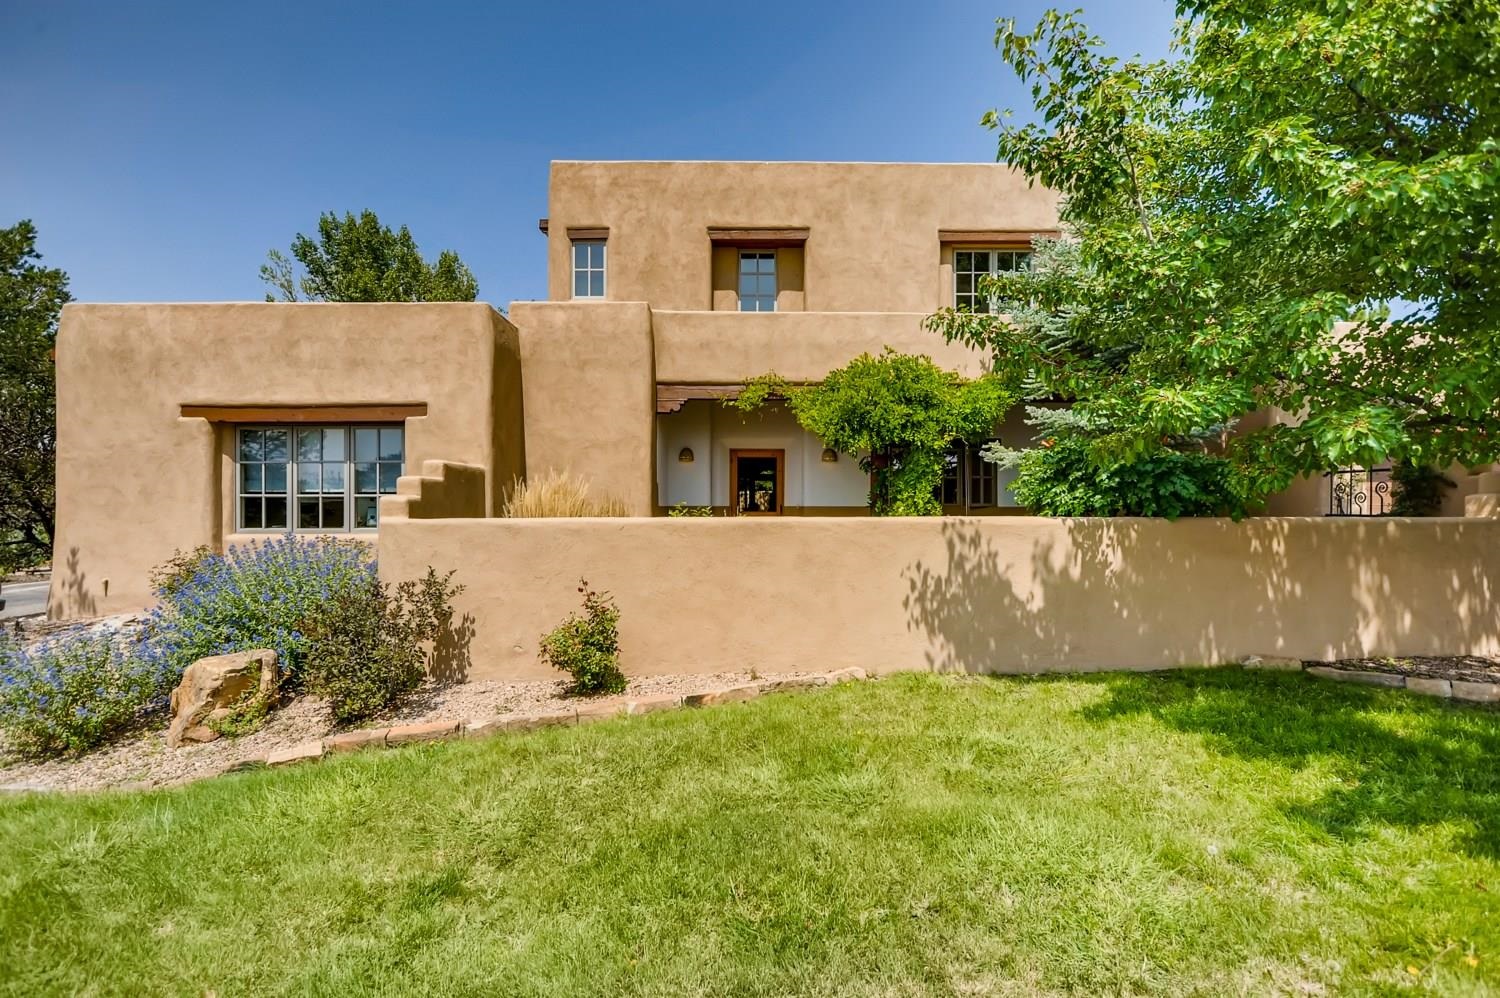 3101 Old Pecos Trail #607, Santa Fe, New Mexico 87505, 4 Bedrooms Bedrooms, ,4 BathroomsBathrooms,Residential,For Sale,3101 Old Pecos Trail #607,202103741